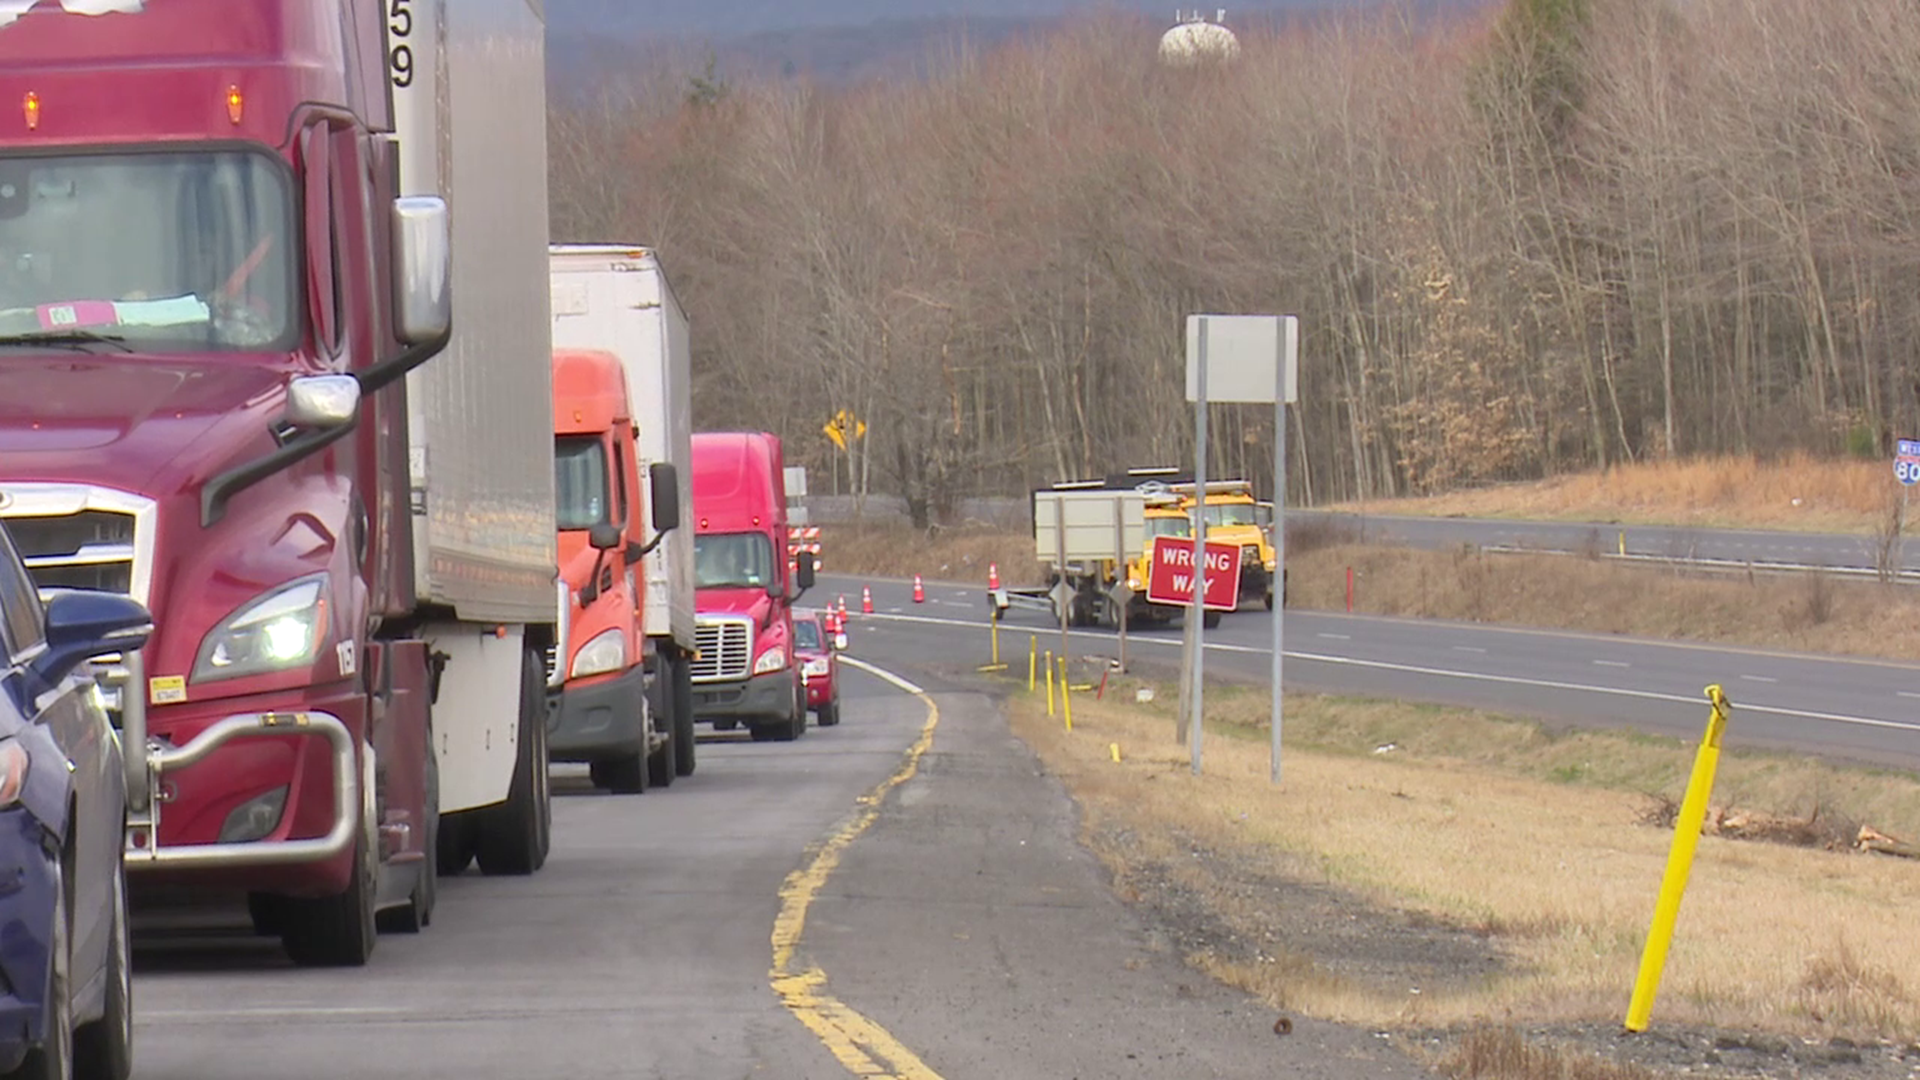 Two tractor-trailers were involved in the accident that resulted in a long closure.